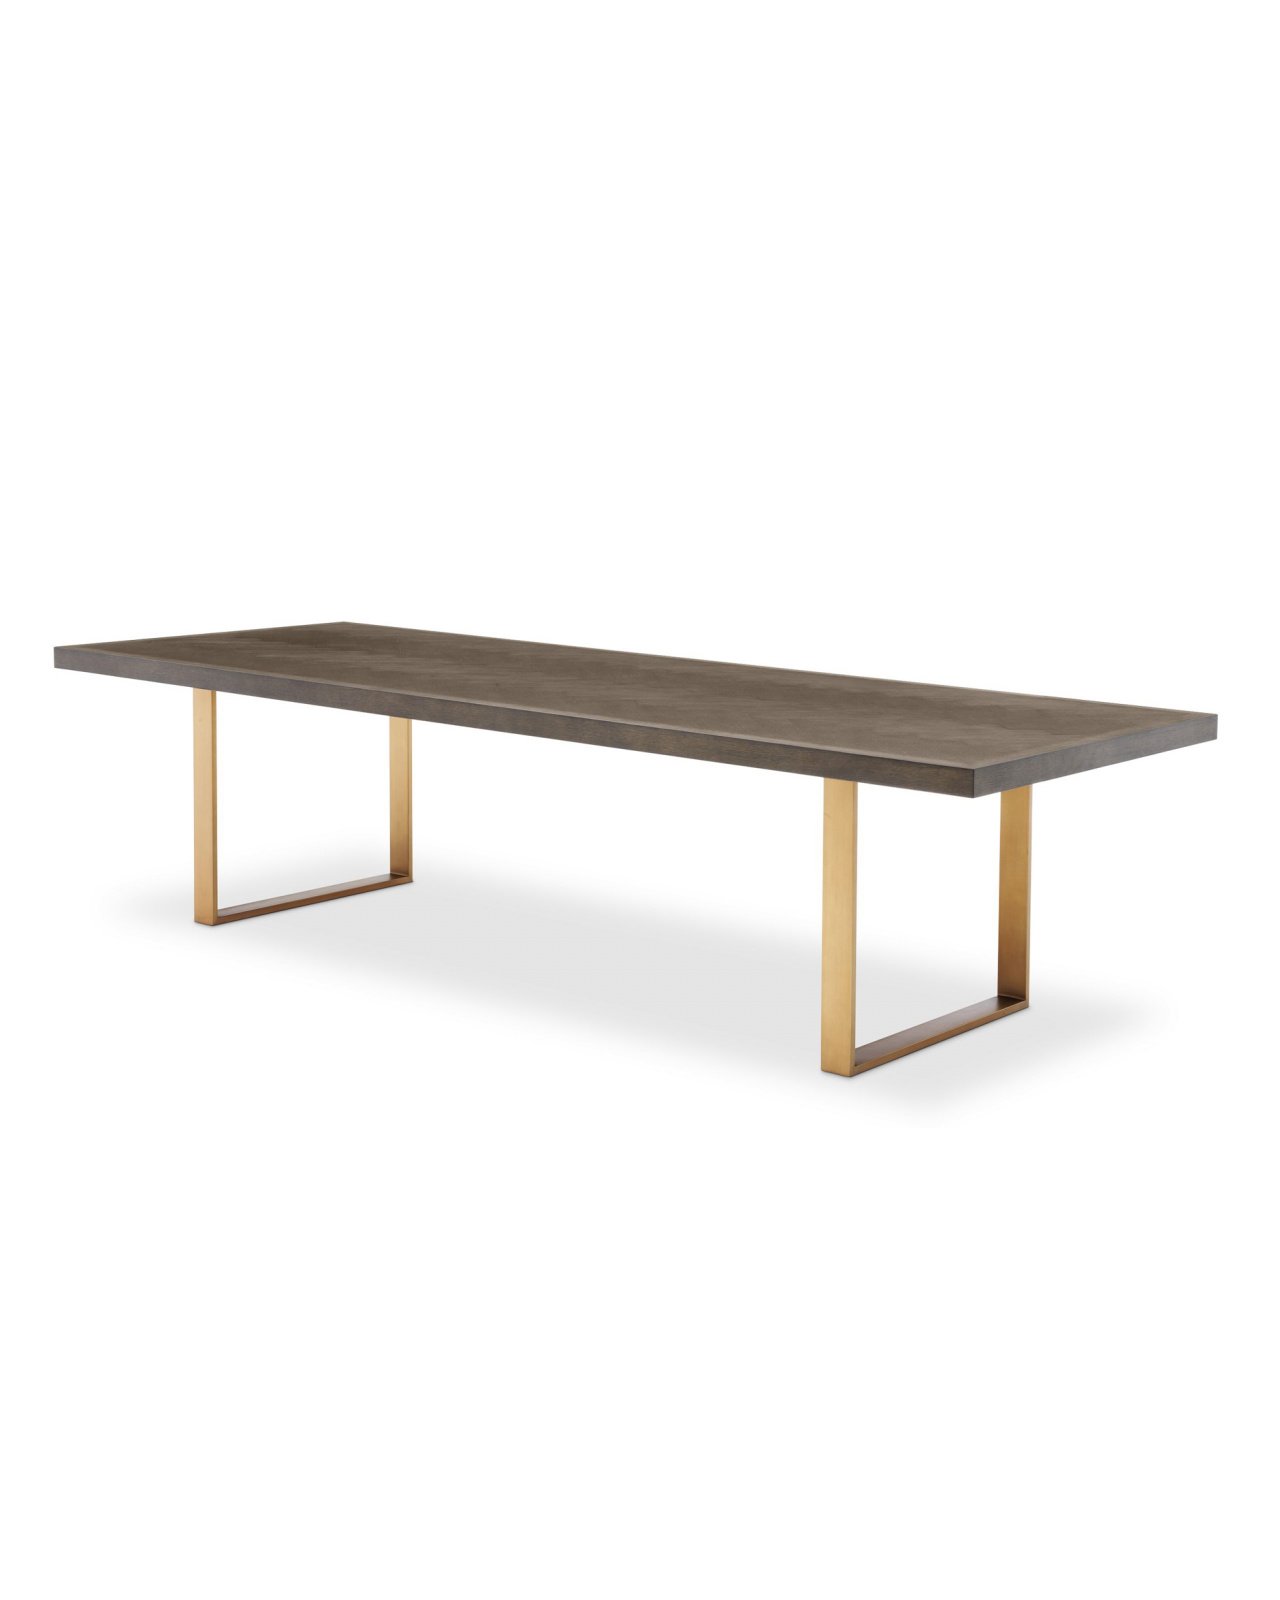 Dining table Melchior Brown Oak